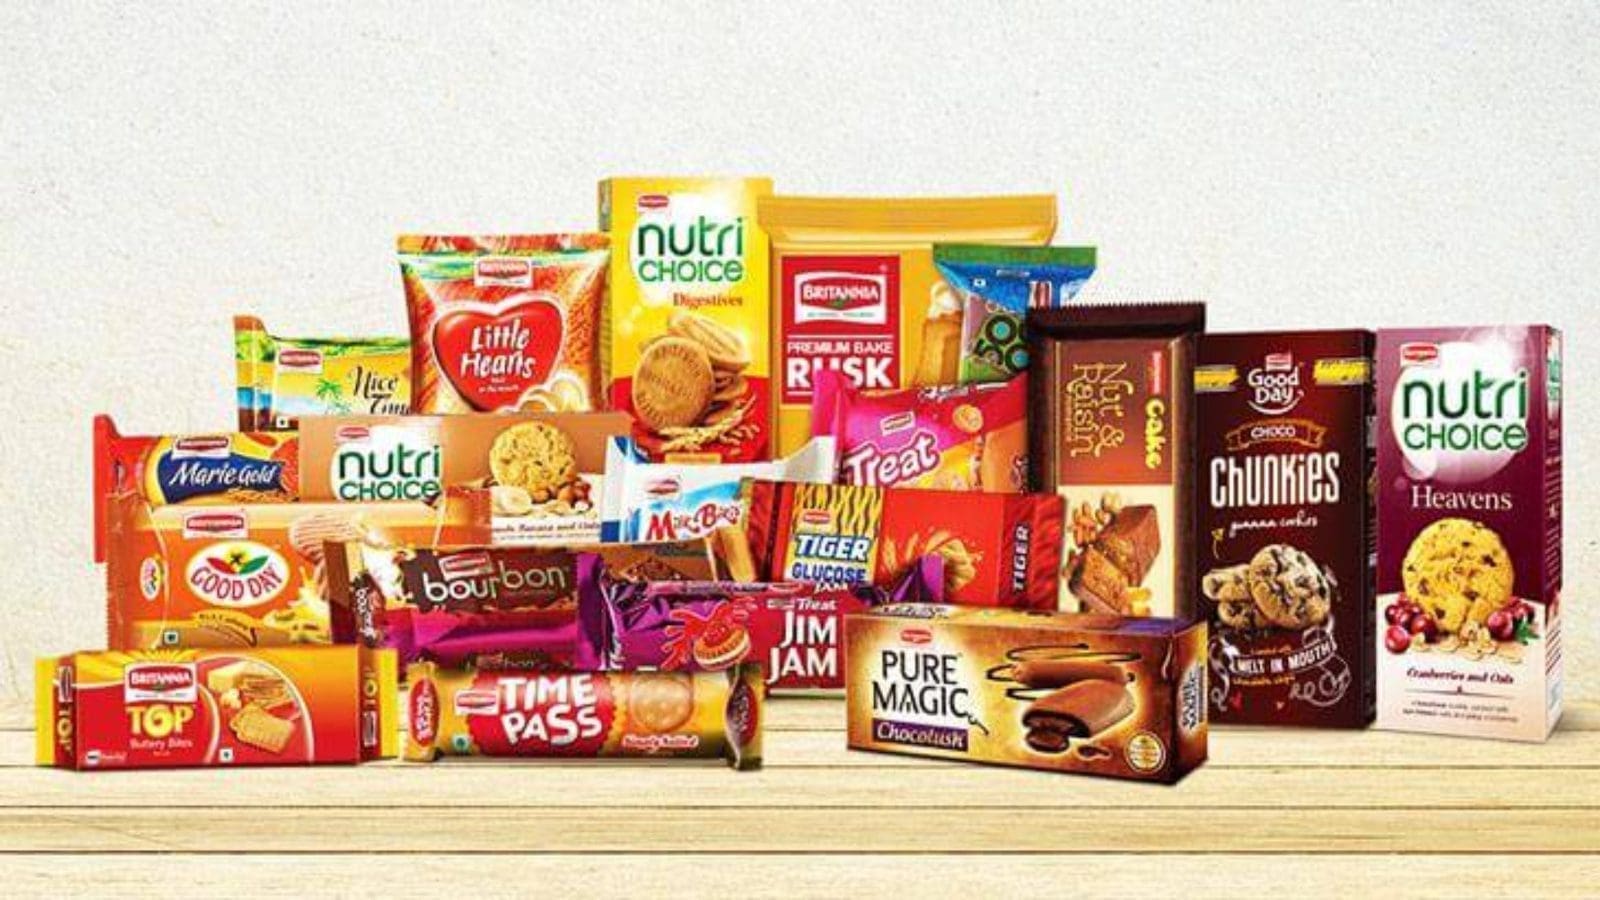 FSSAI finalizes guidelines on advertisement of food products